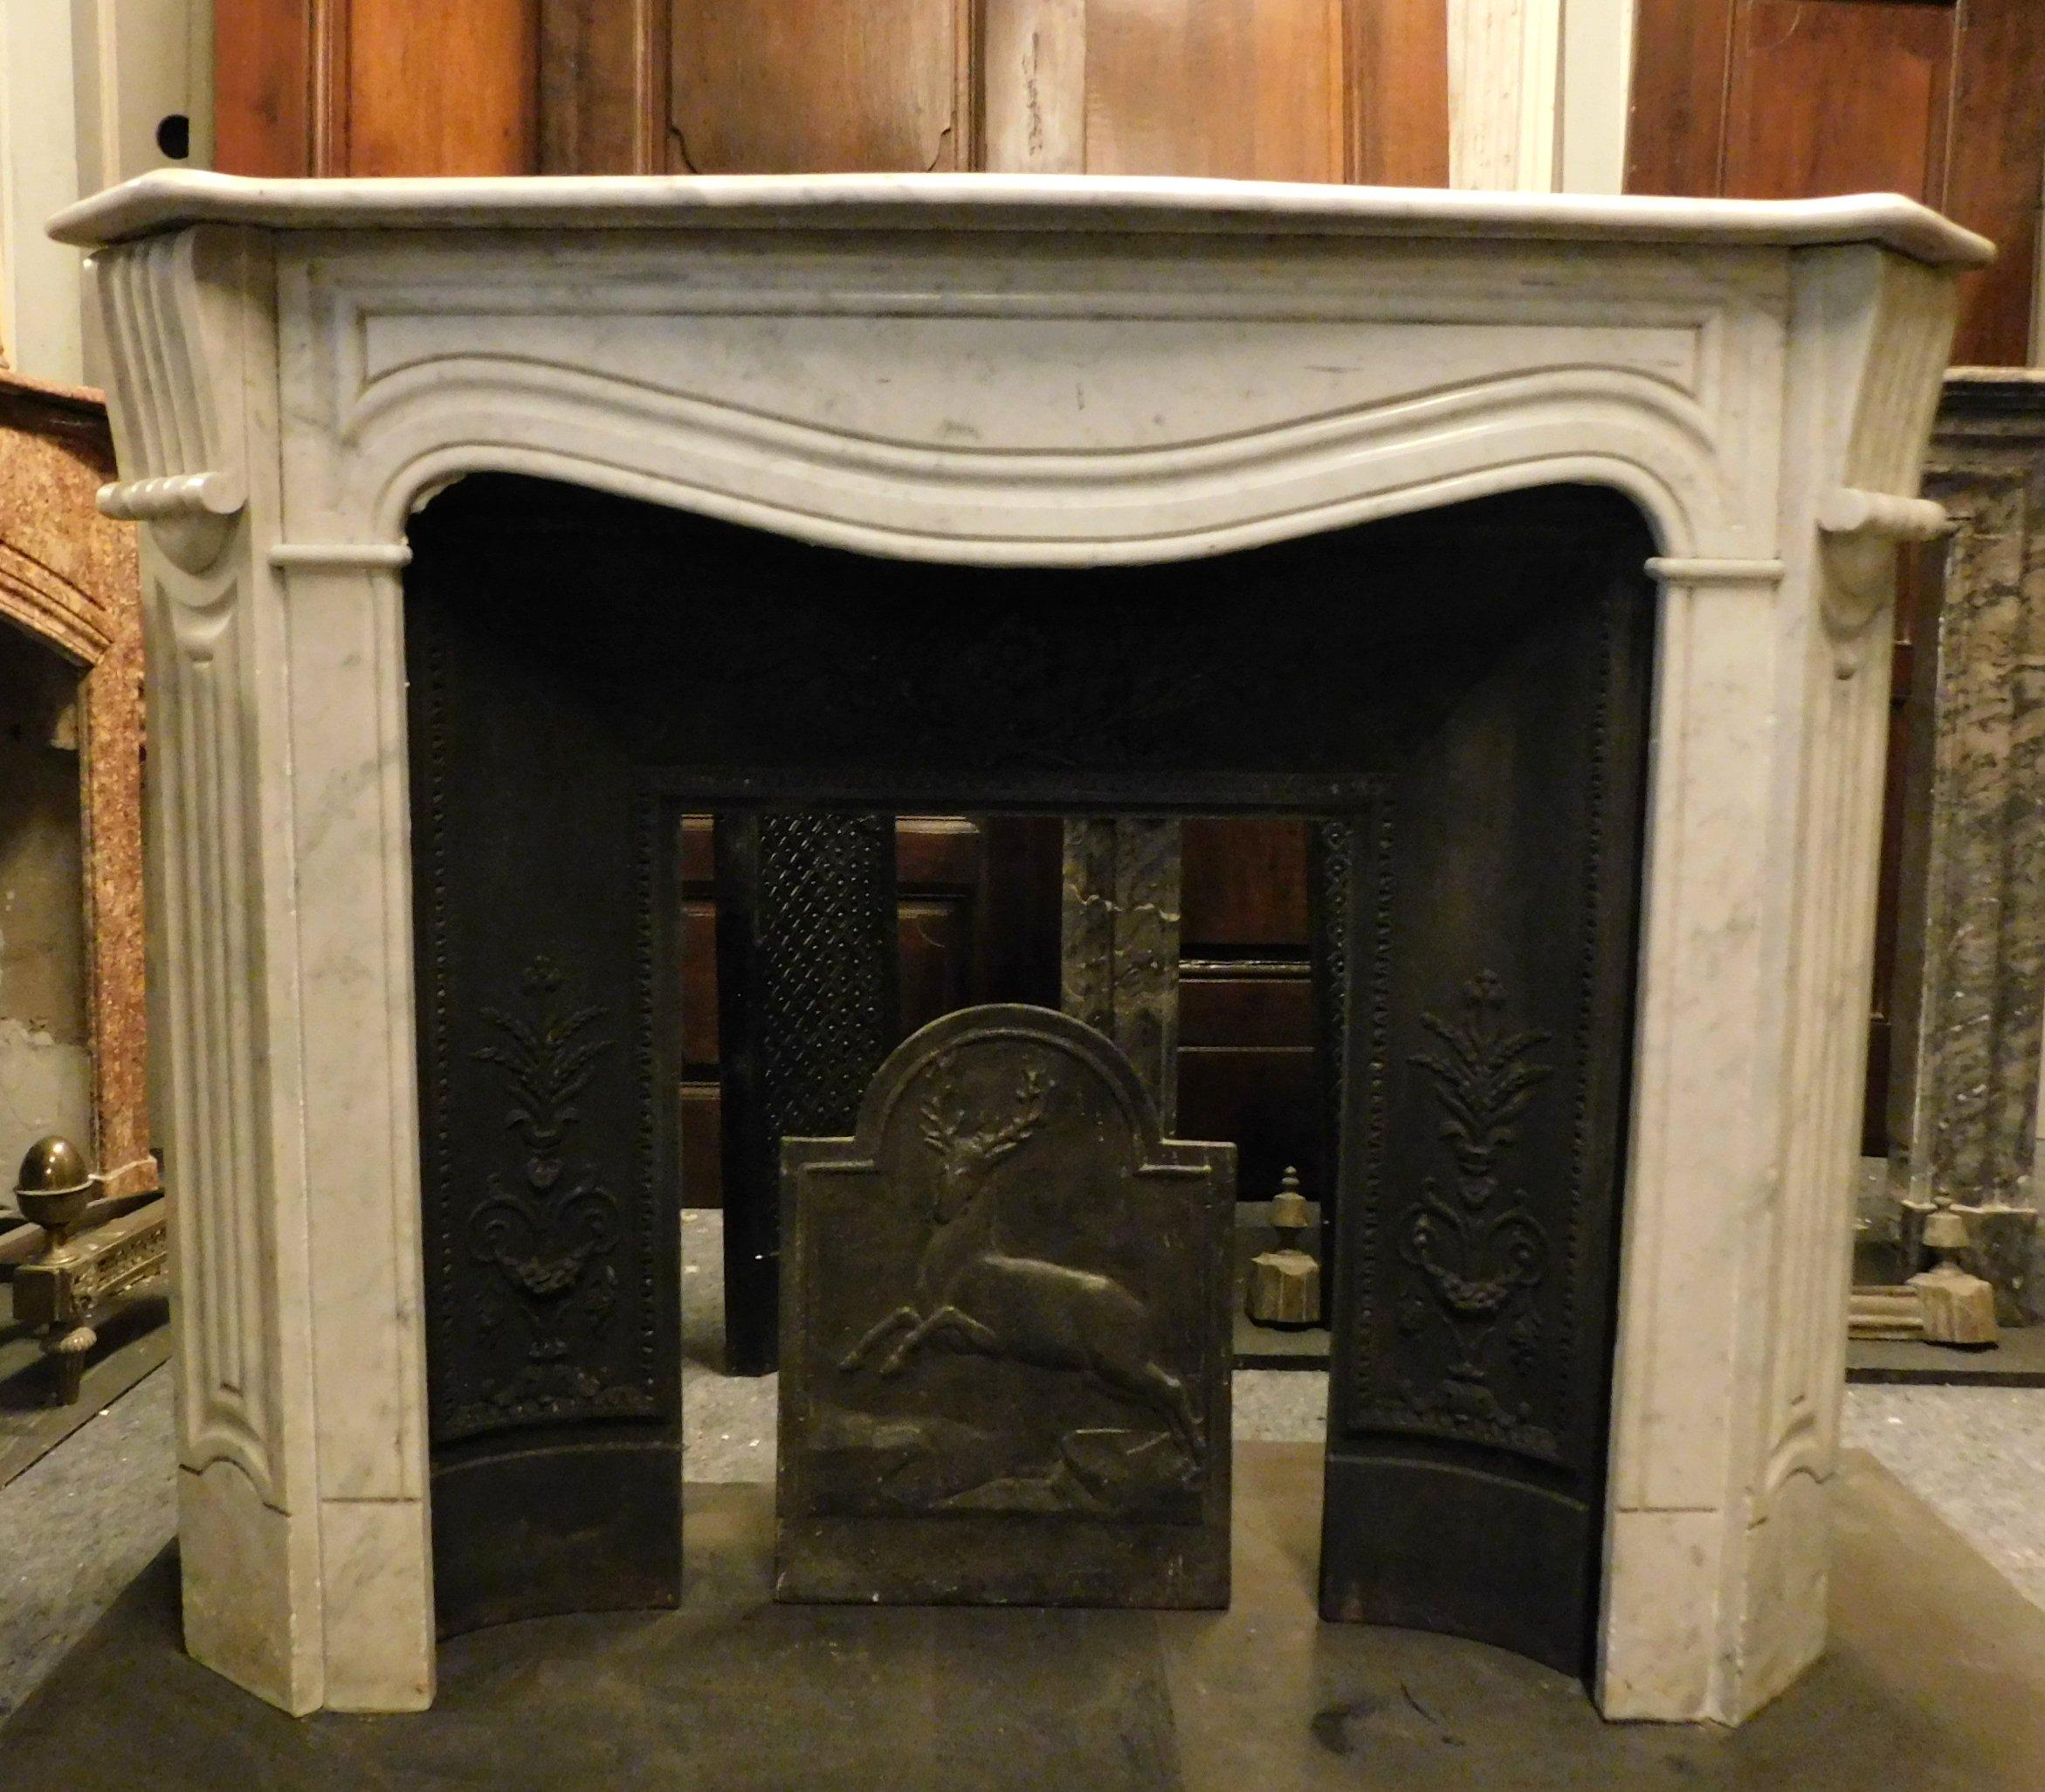 Antique fireplace in white Carrara marble, sculpted with sinuous, elegant and simple shapes, built and sculpted by hand in the early 1900s, from a home in Genoa (Italy).
Ideal in modern homes, as a chic and impactful corner of fire, luxury and